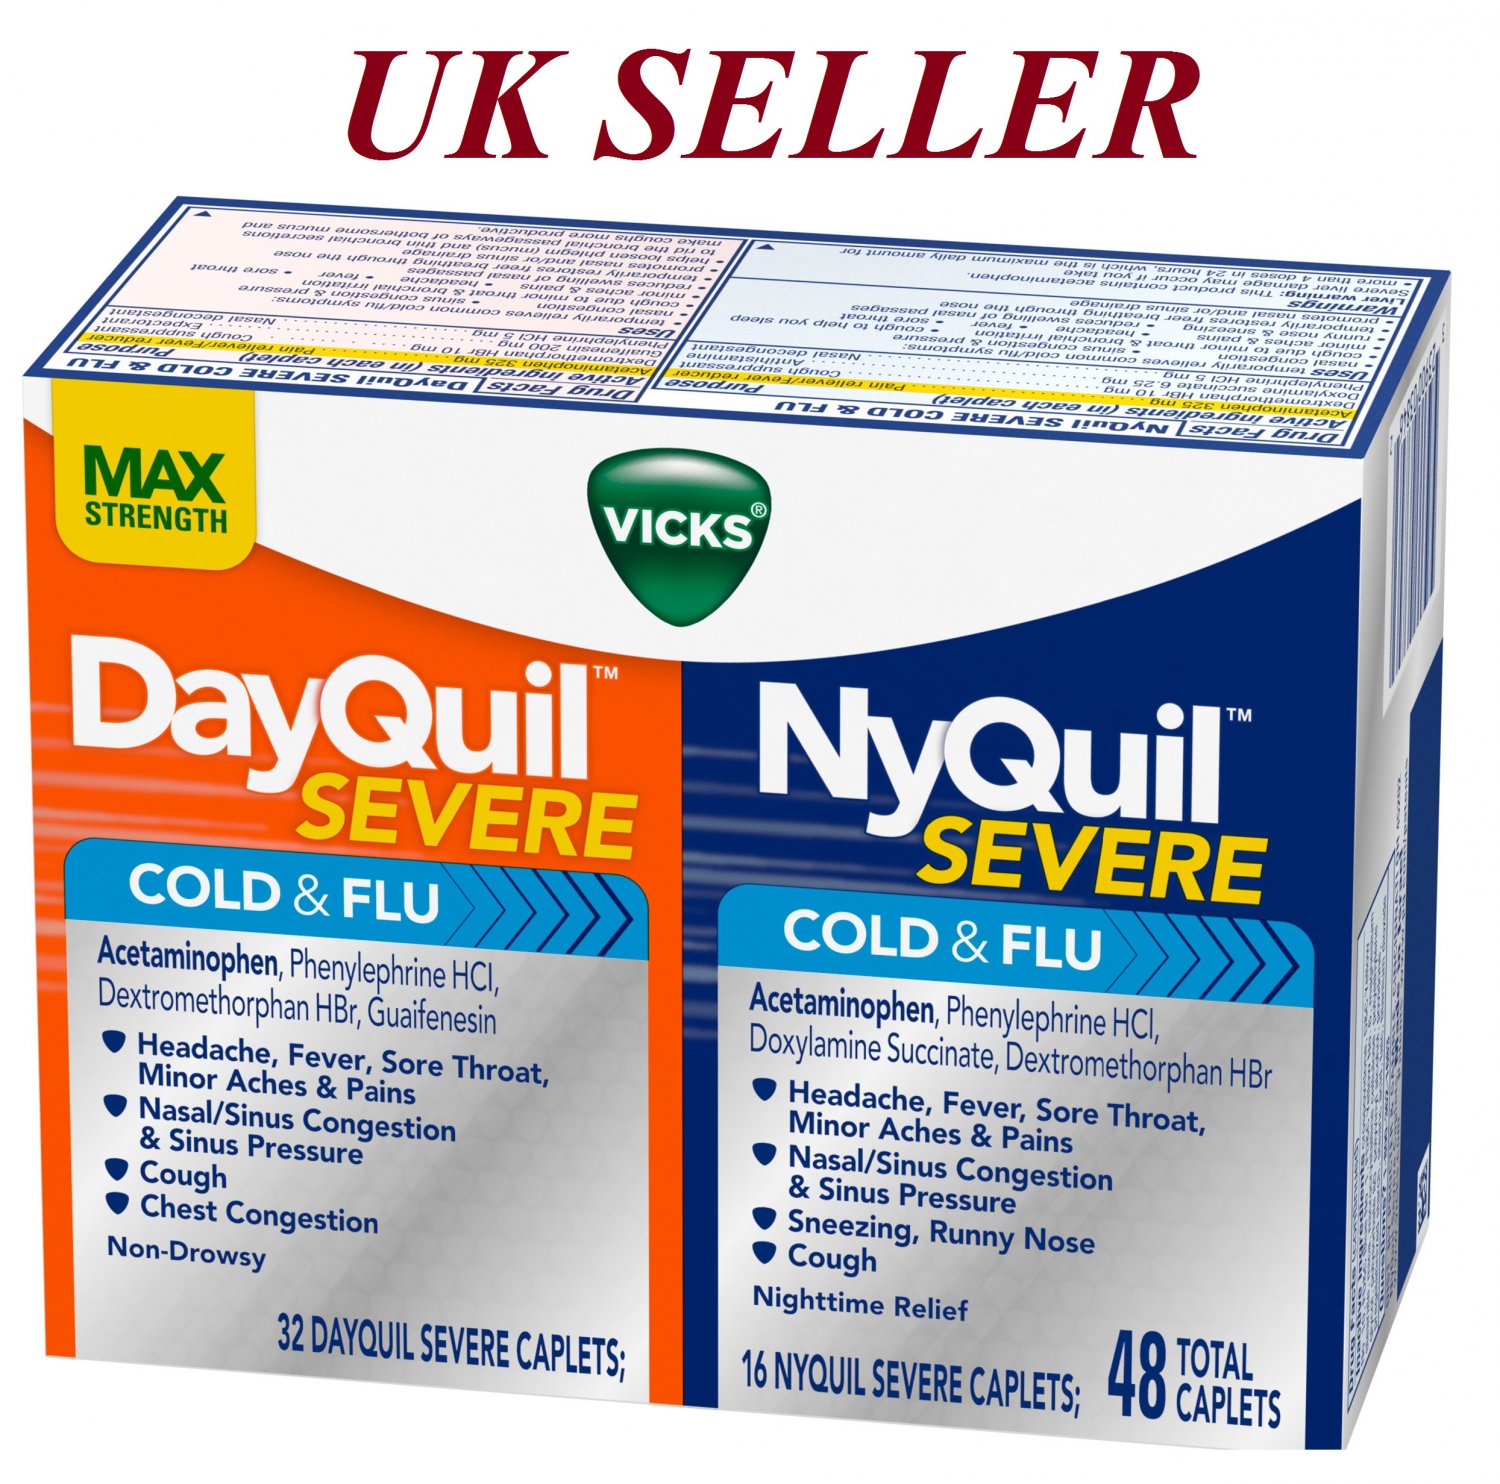 Vicks NyQuil and DayQuil SEVERE Cough Cold and Flu Relief, 48 Caplets *UK S...